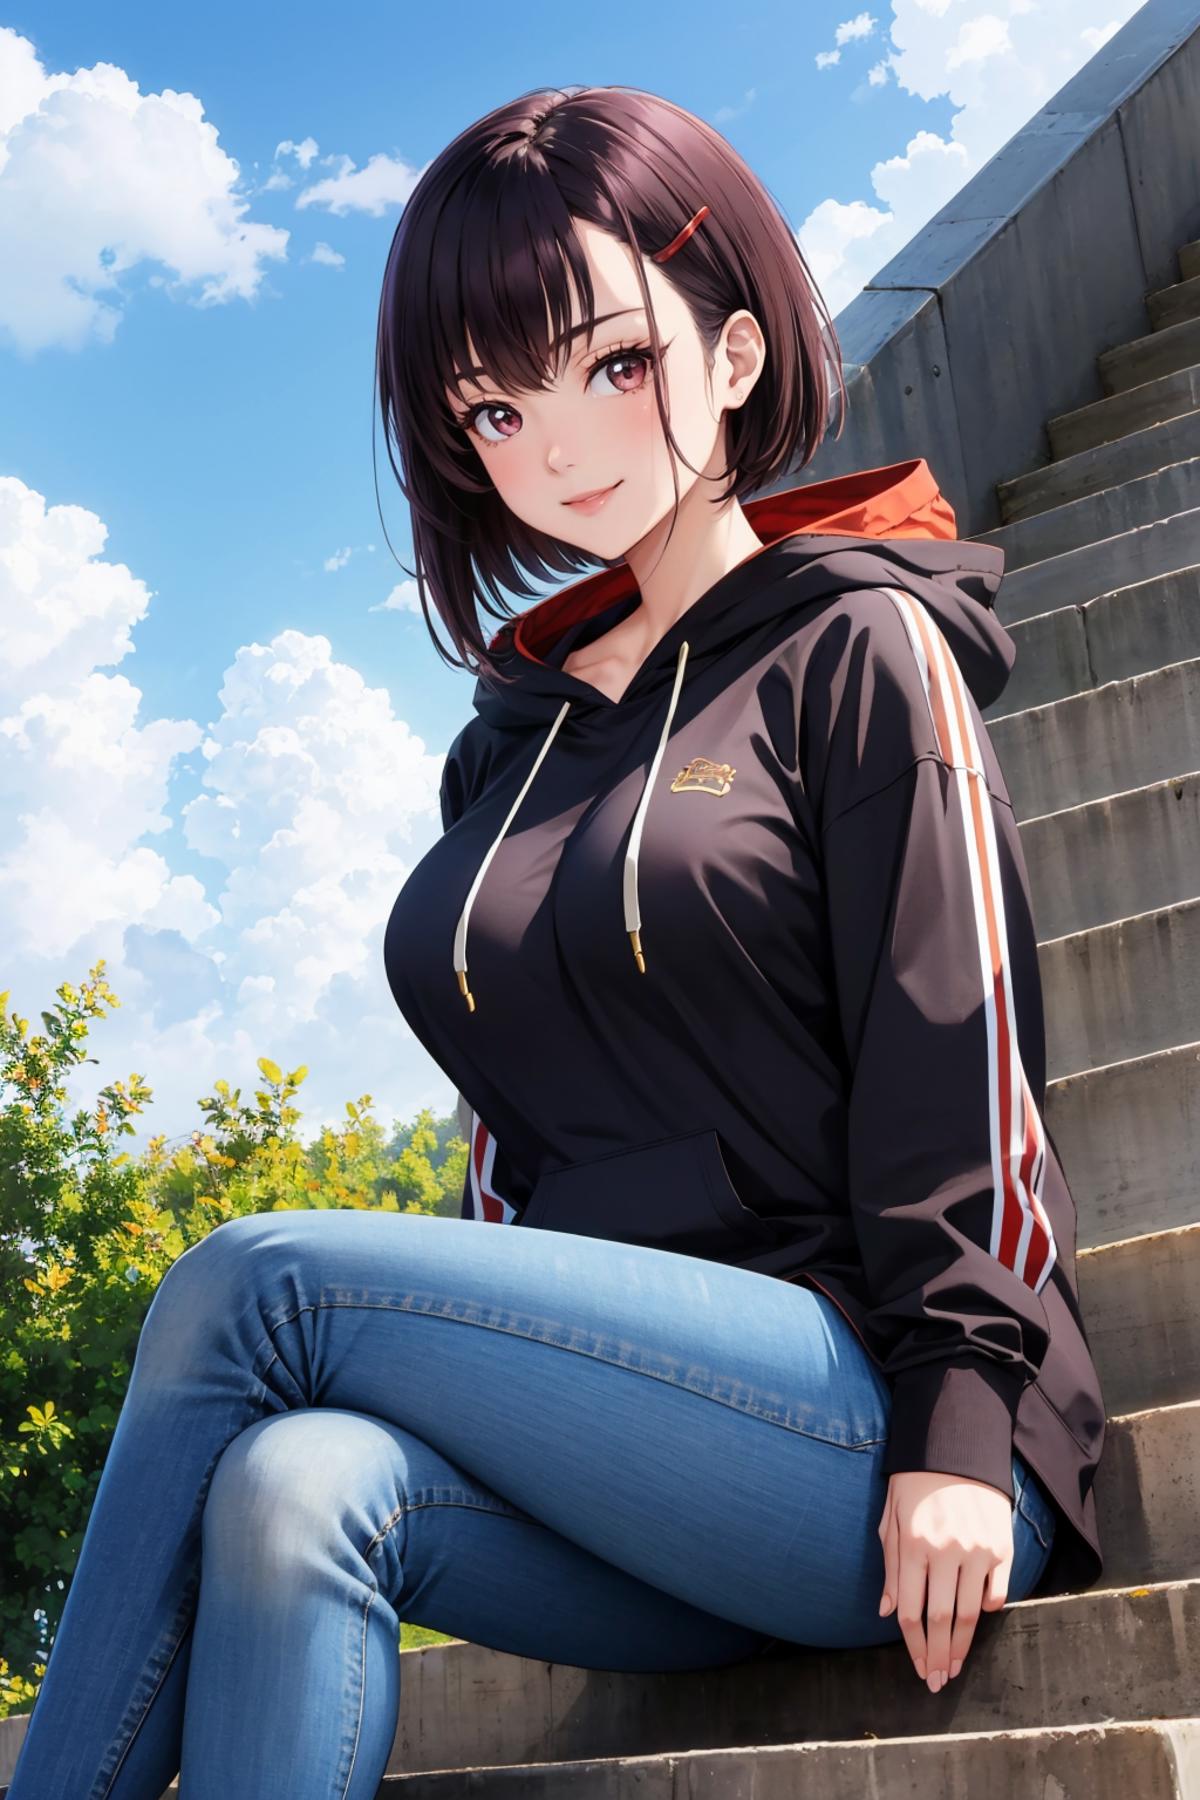 A woman wearing a black hoodie and jeans sitting on stairs with a bright blue sky in the background.